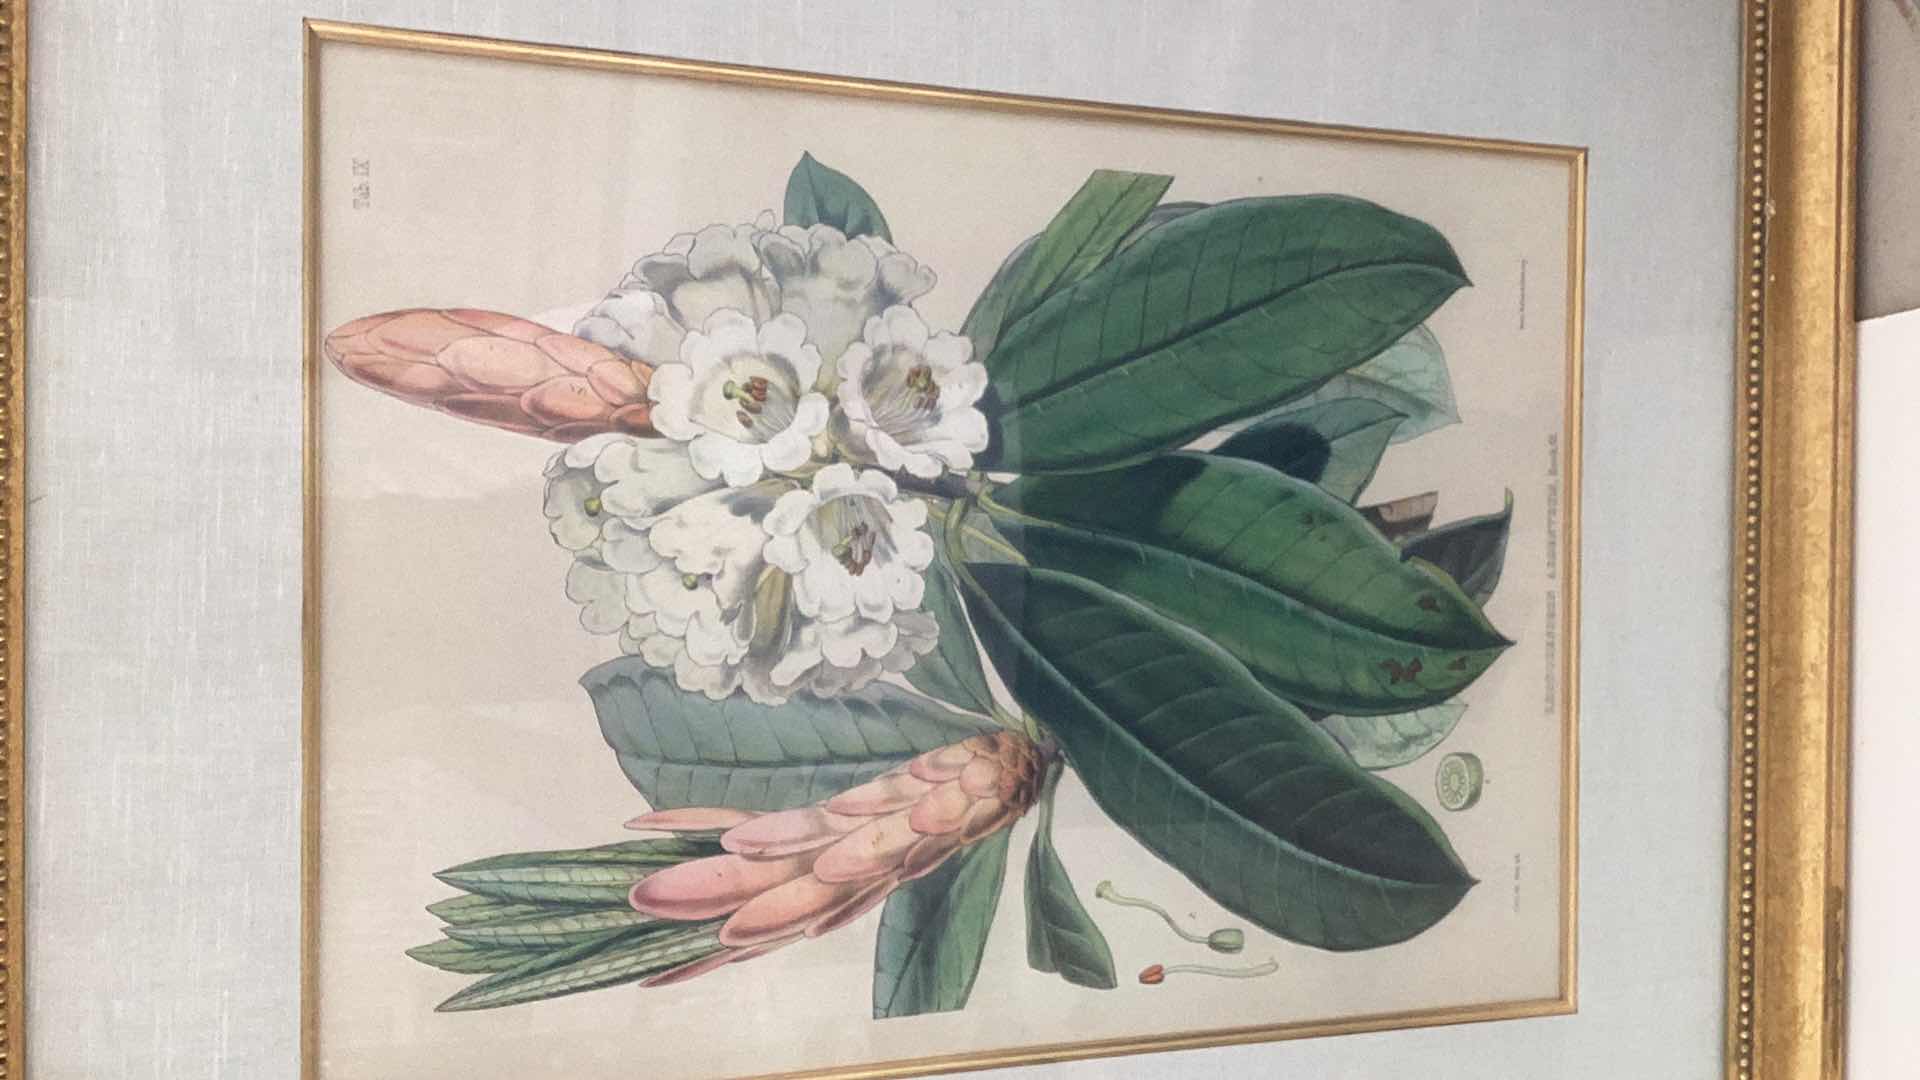 Photo 3 of ANTIQUE 1800’S JOSEPH HOOKER “RHODODENDRON AUCKLAND II, HOOK.FIL” FITCH LITHOGRAPH 51” X H 38”